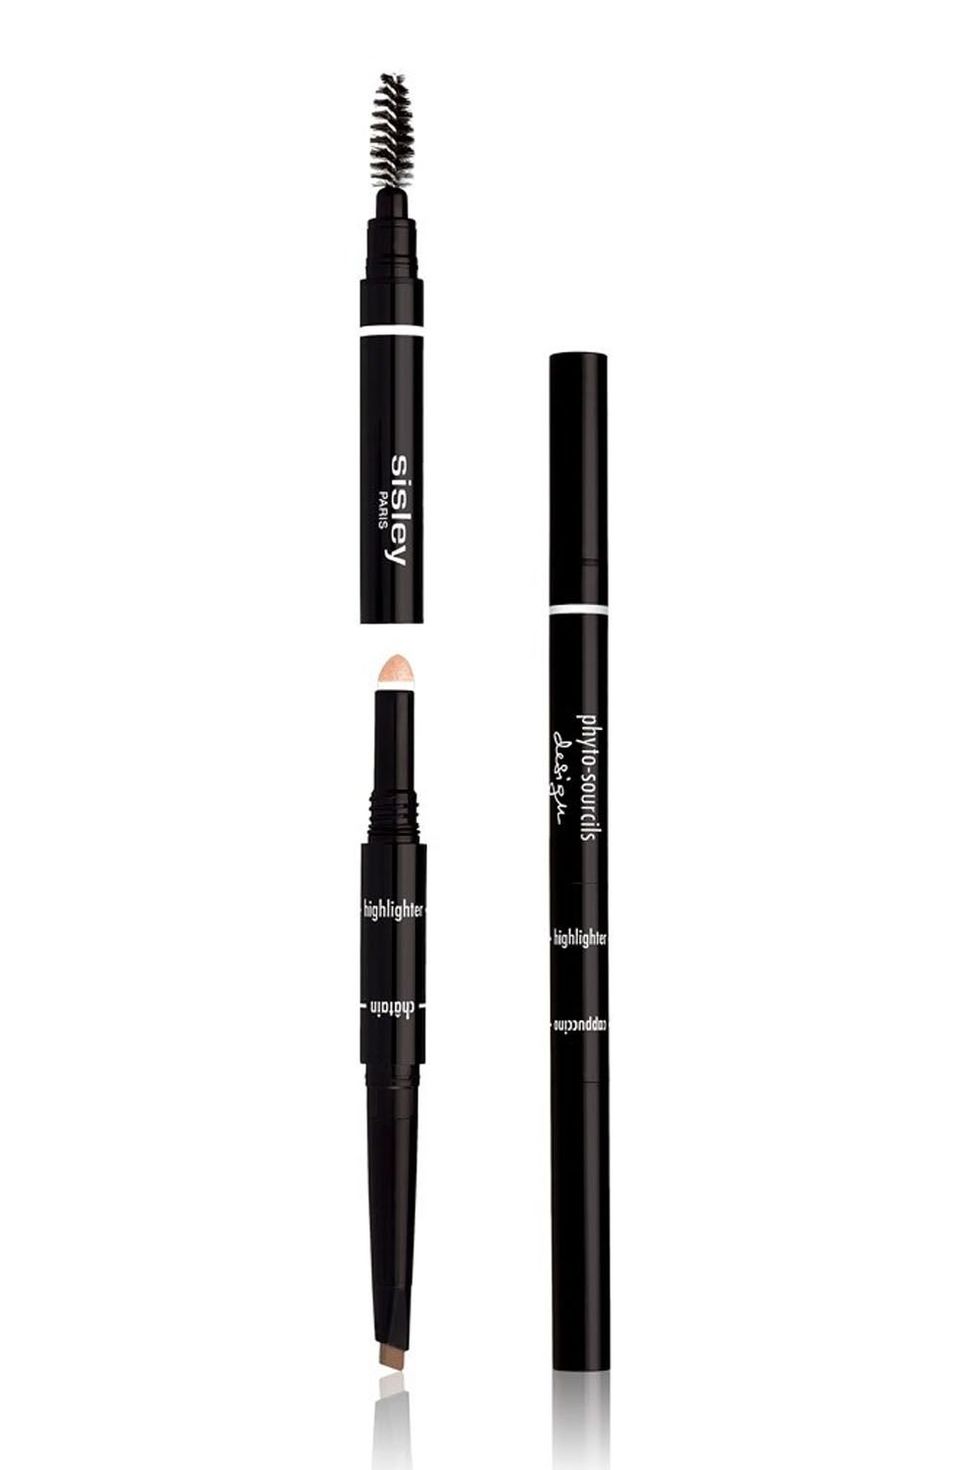 15 Best Eyebrow Pencils of 2022 - Best Eyebrow Products Reviewed